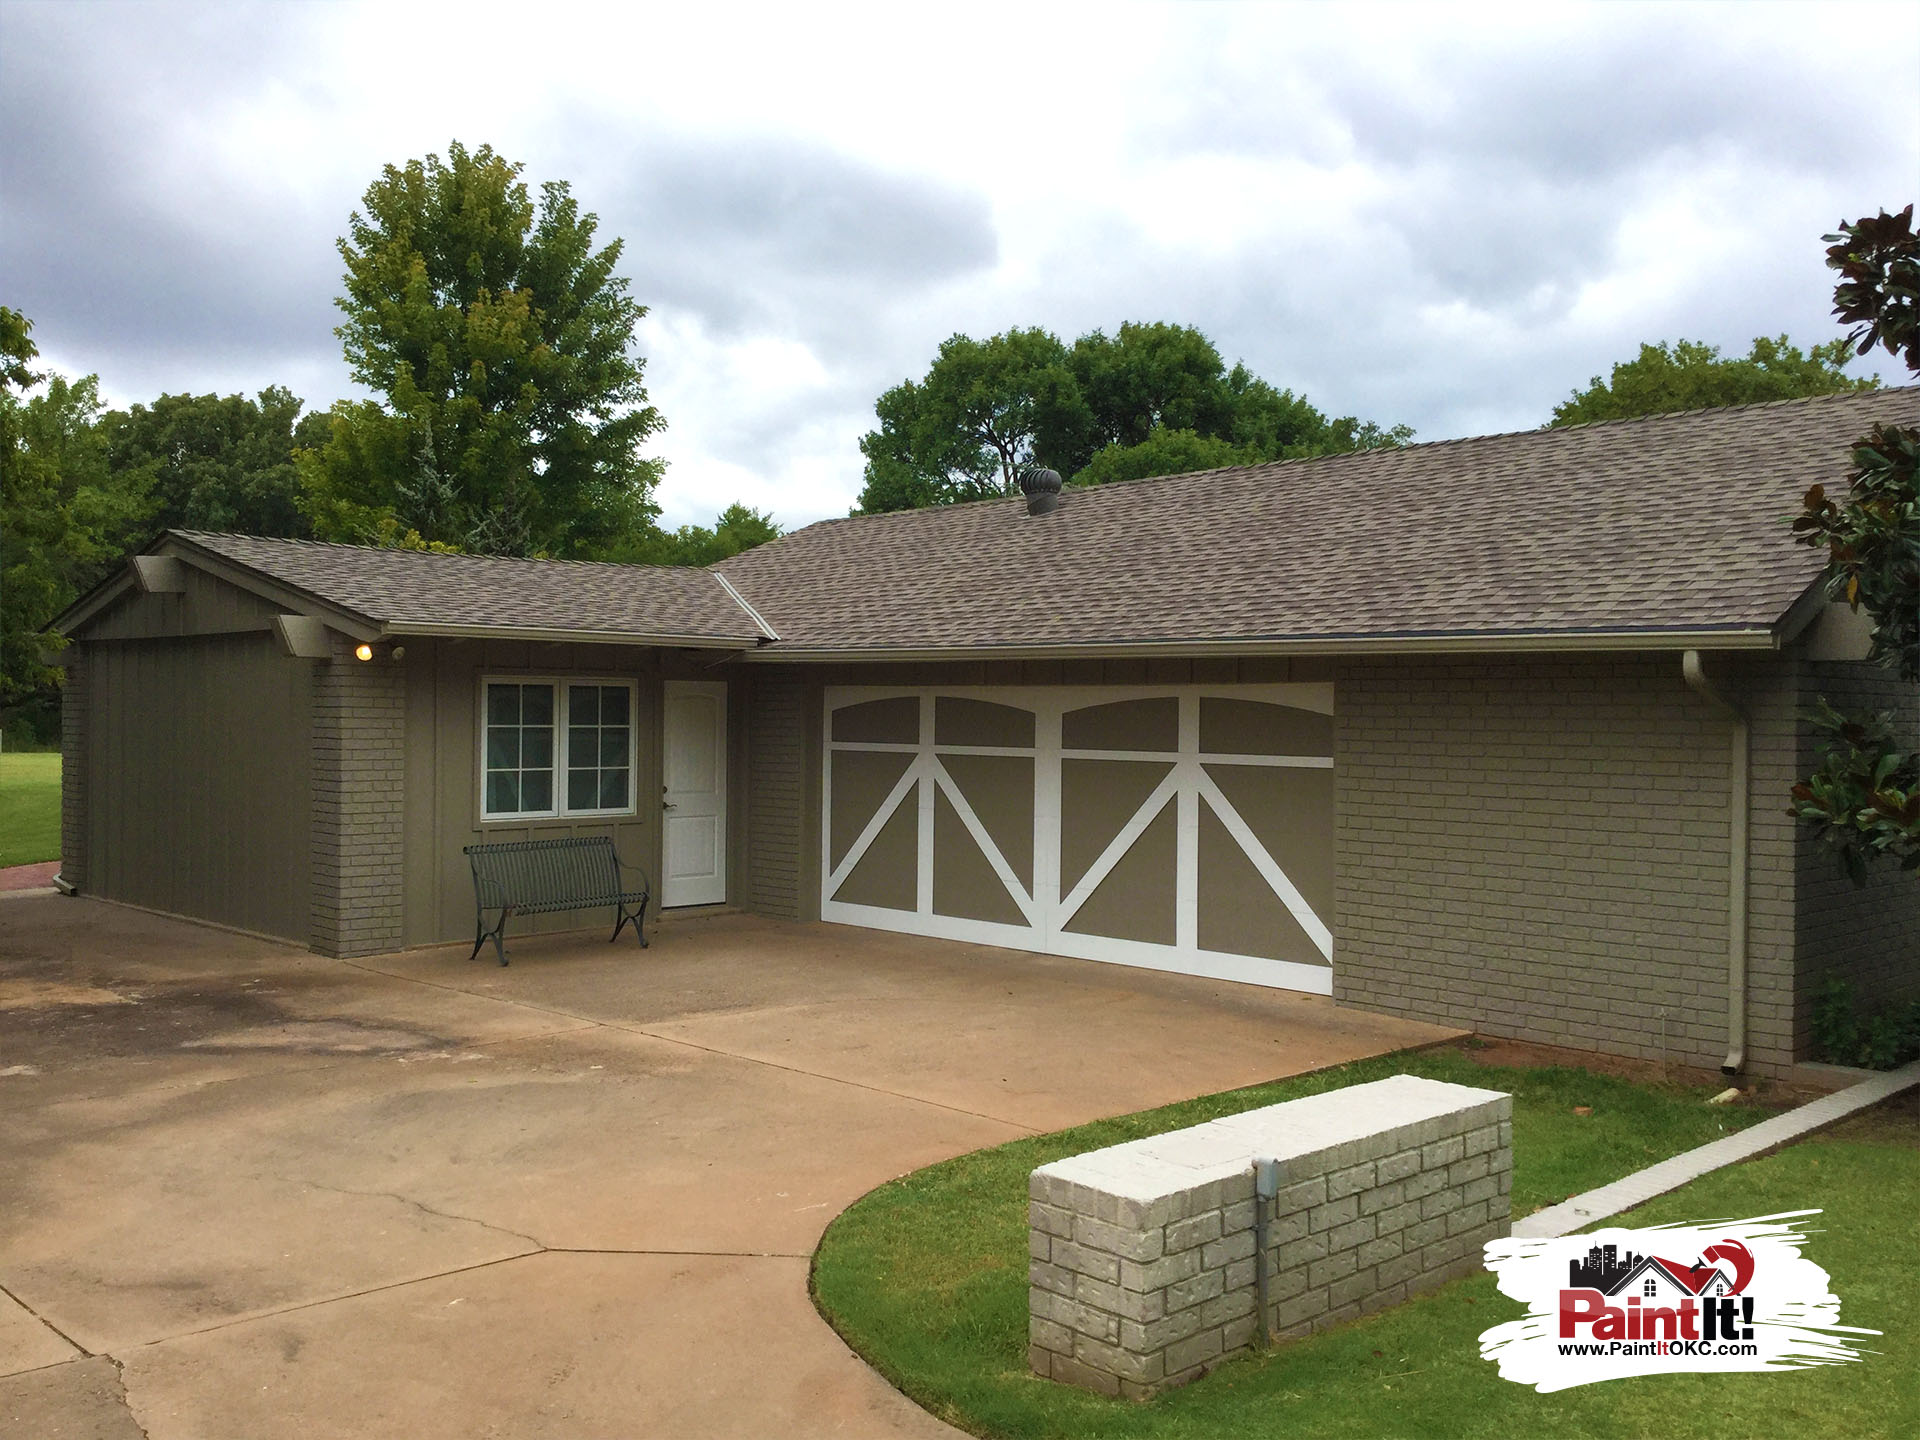 A fresh exterior painting in Edmond, OK that shows the skills of Paint It OKC.